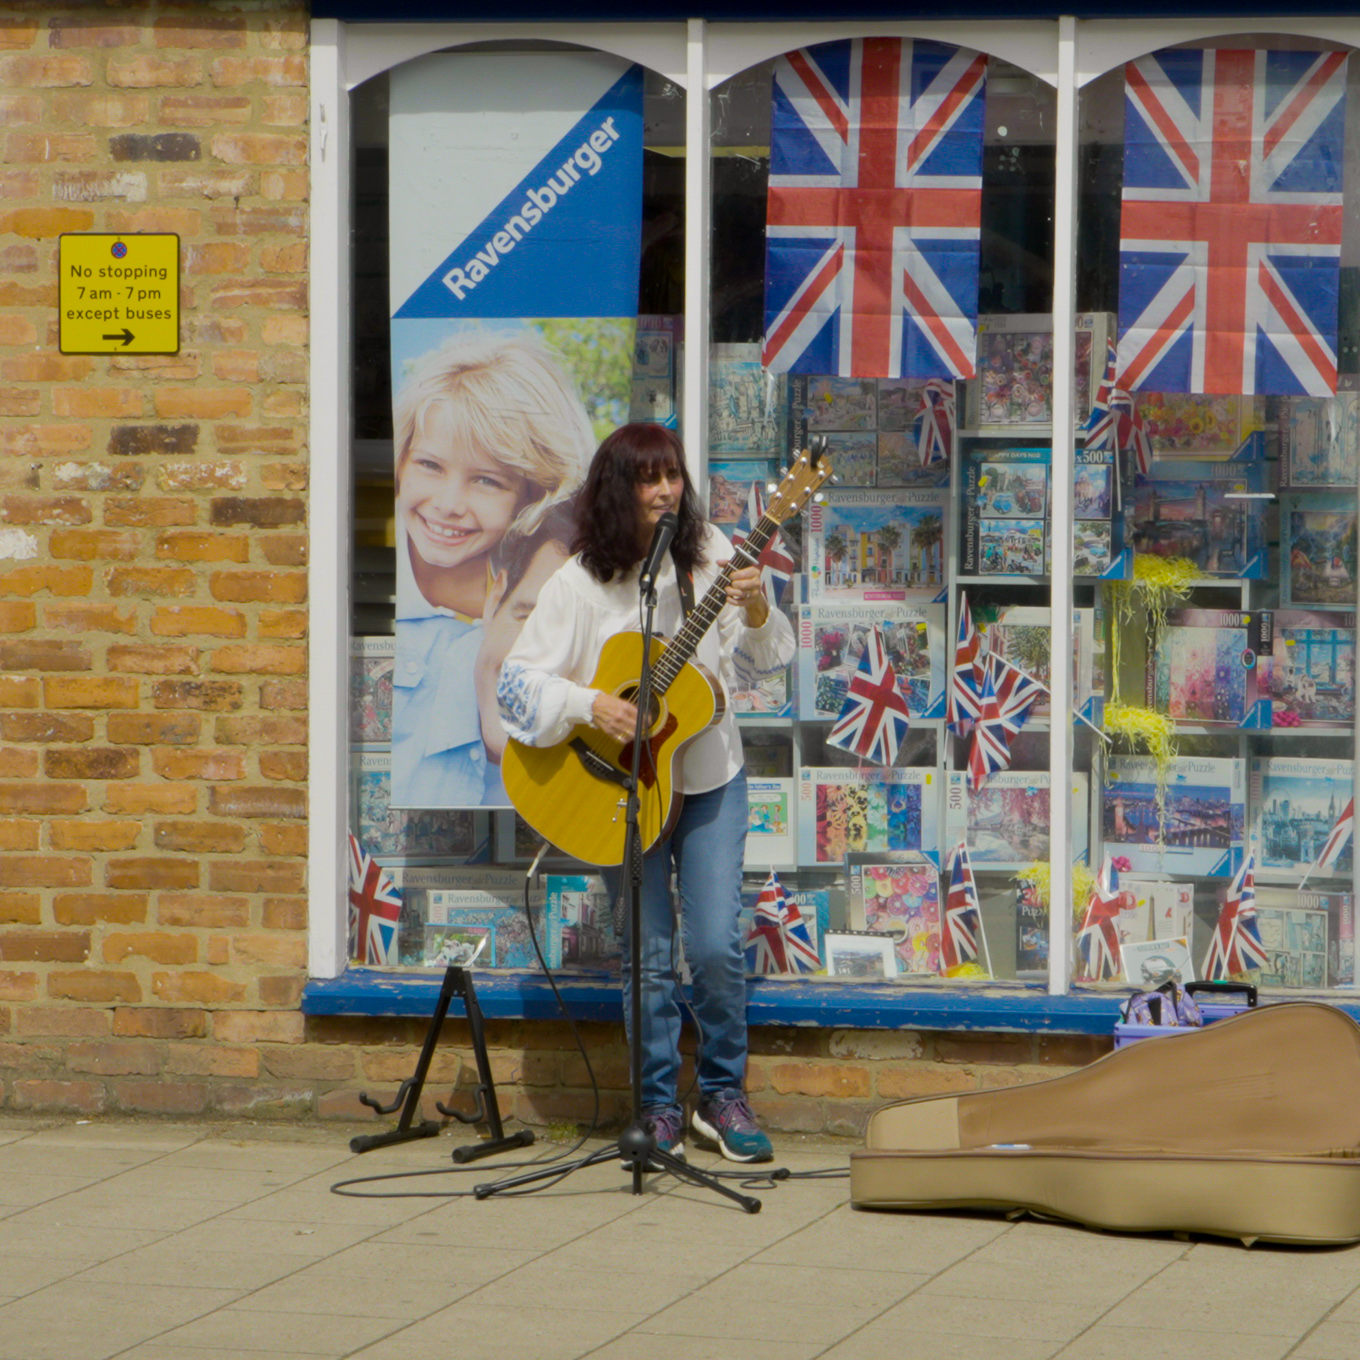 Nicola Haxby busking on the street with her guitar and microphone.